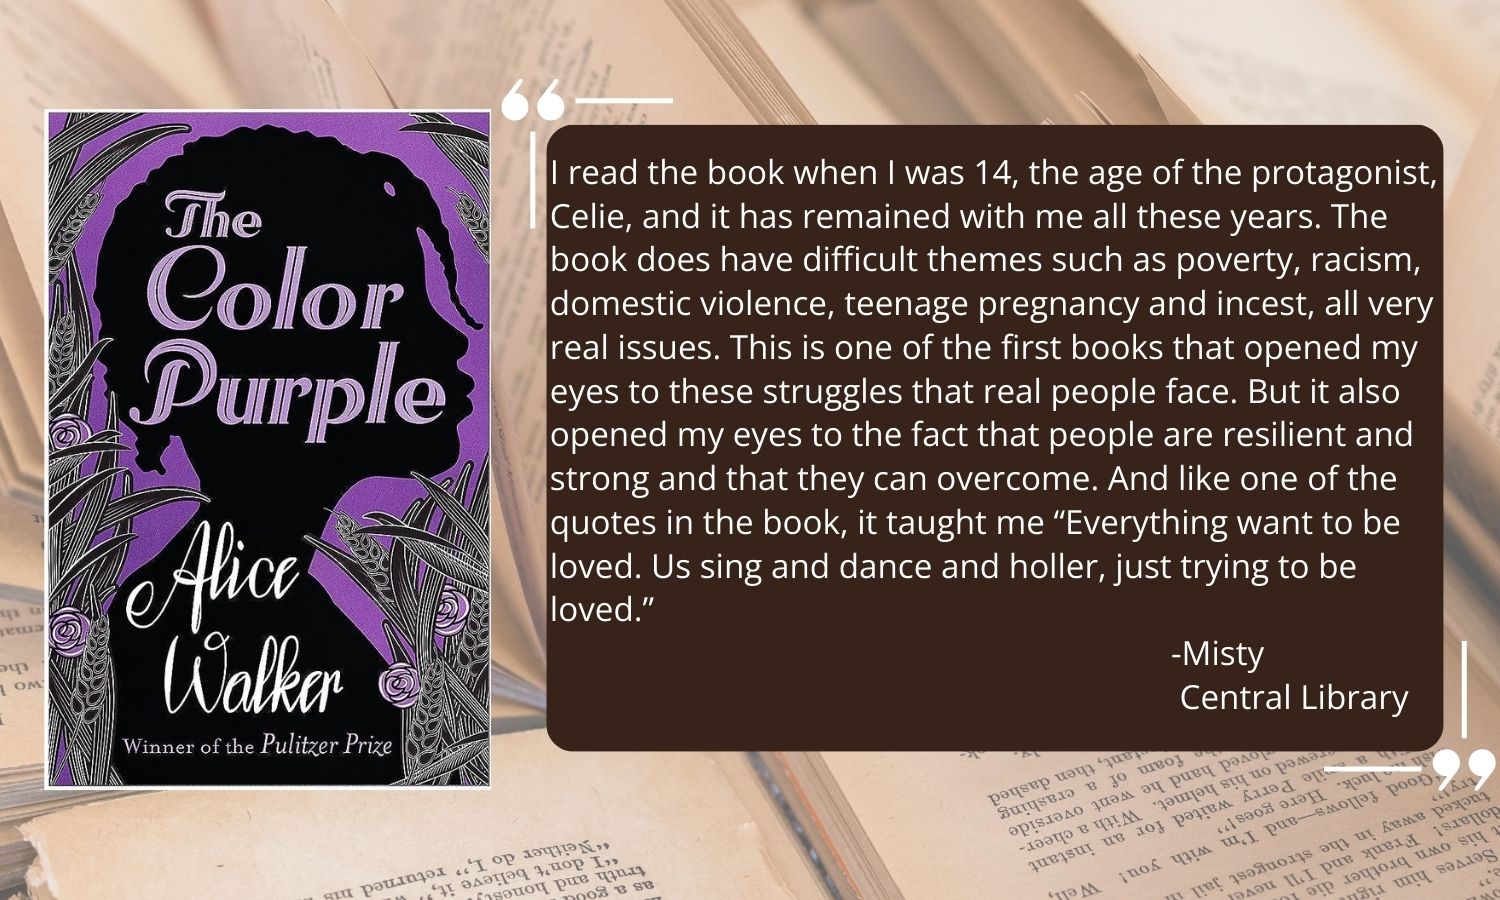 The Color Purple by Alice Walker with staff testimonial